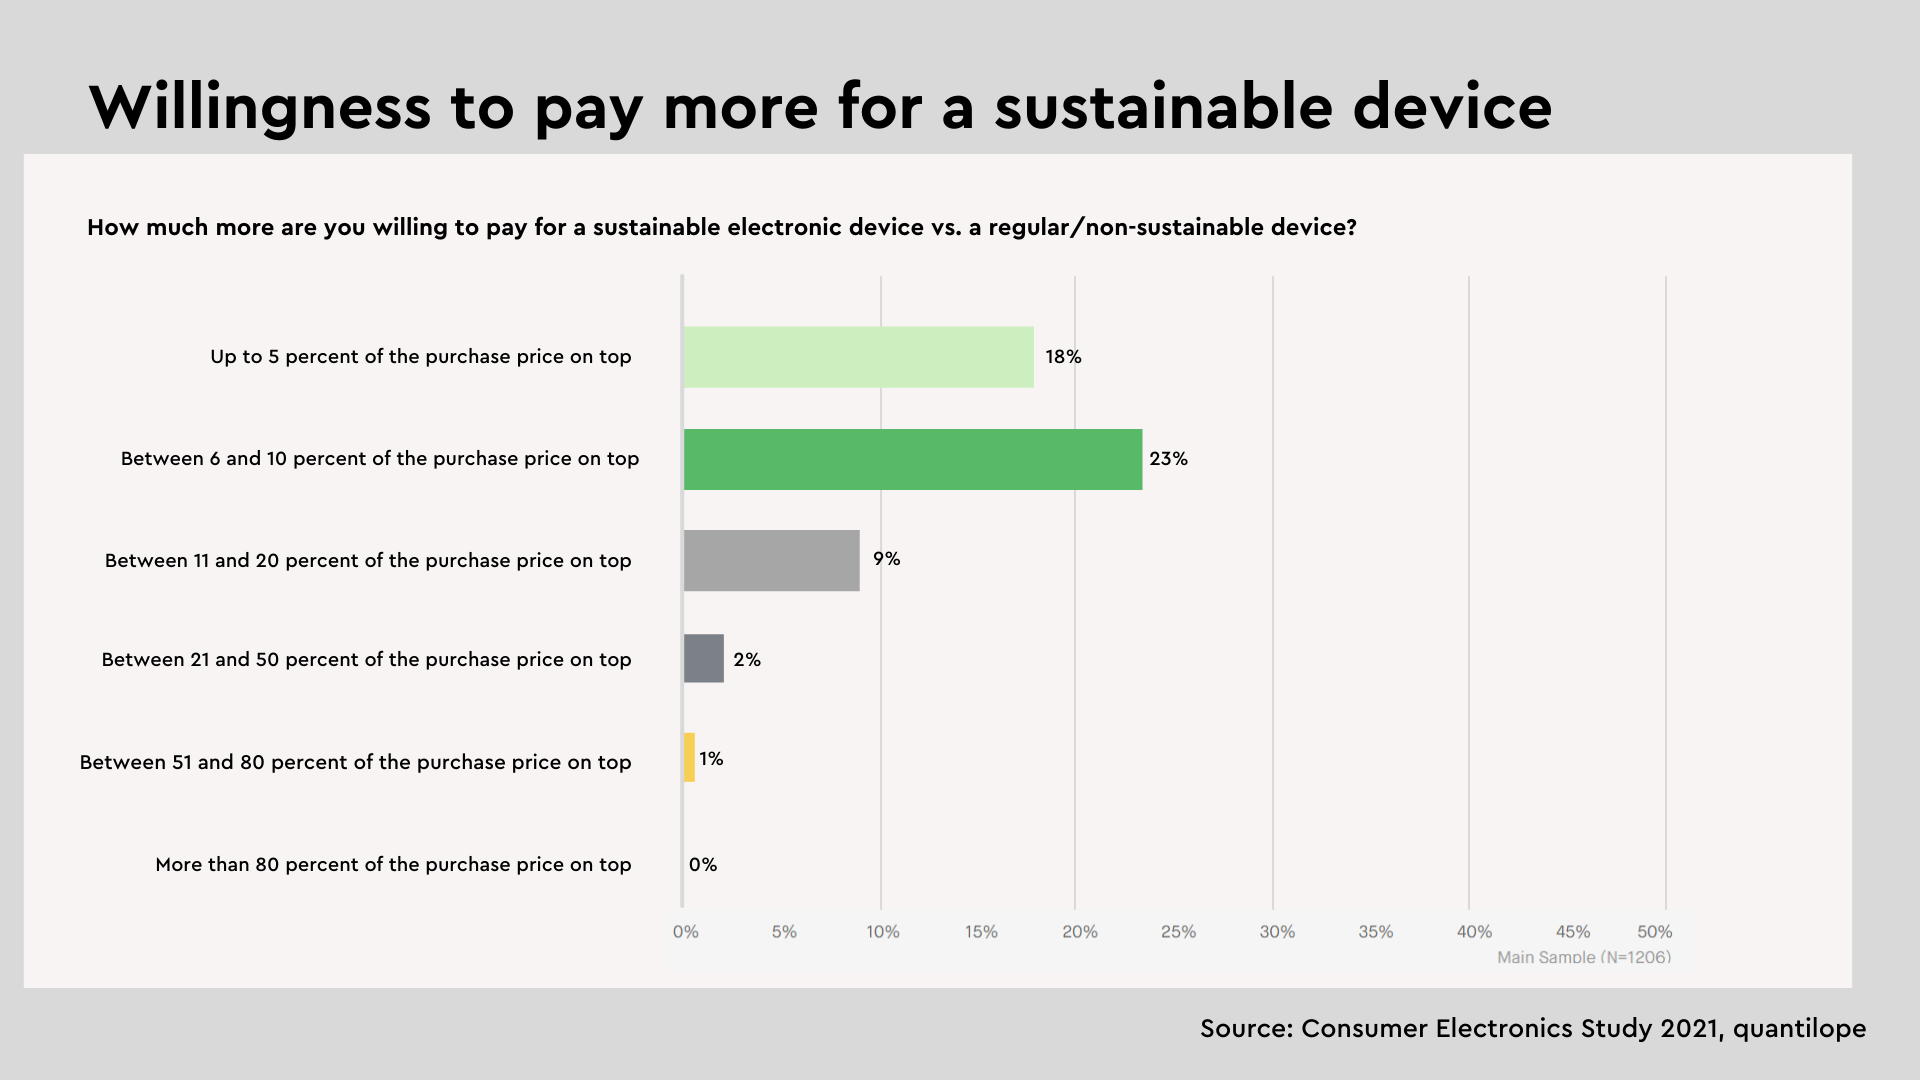 Willingness-to-pay-more-sustainable-device-consumer-electronics-2021